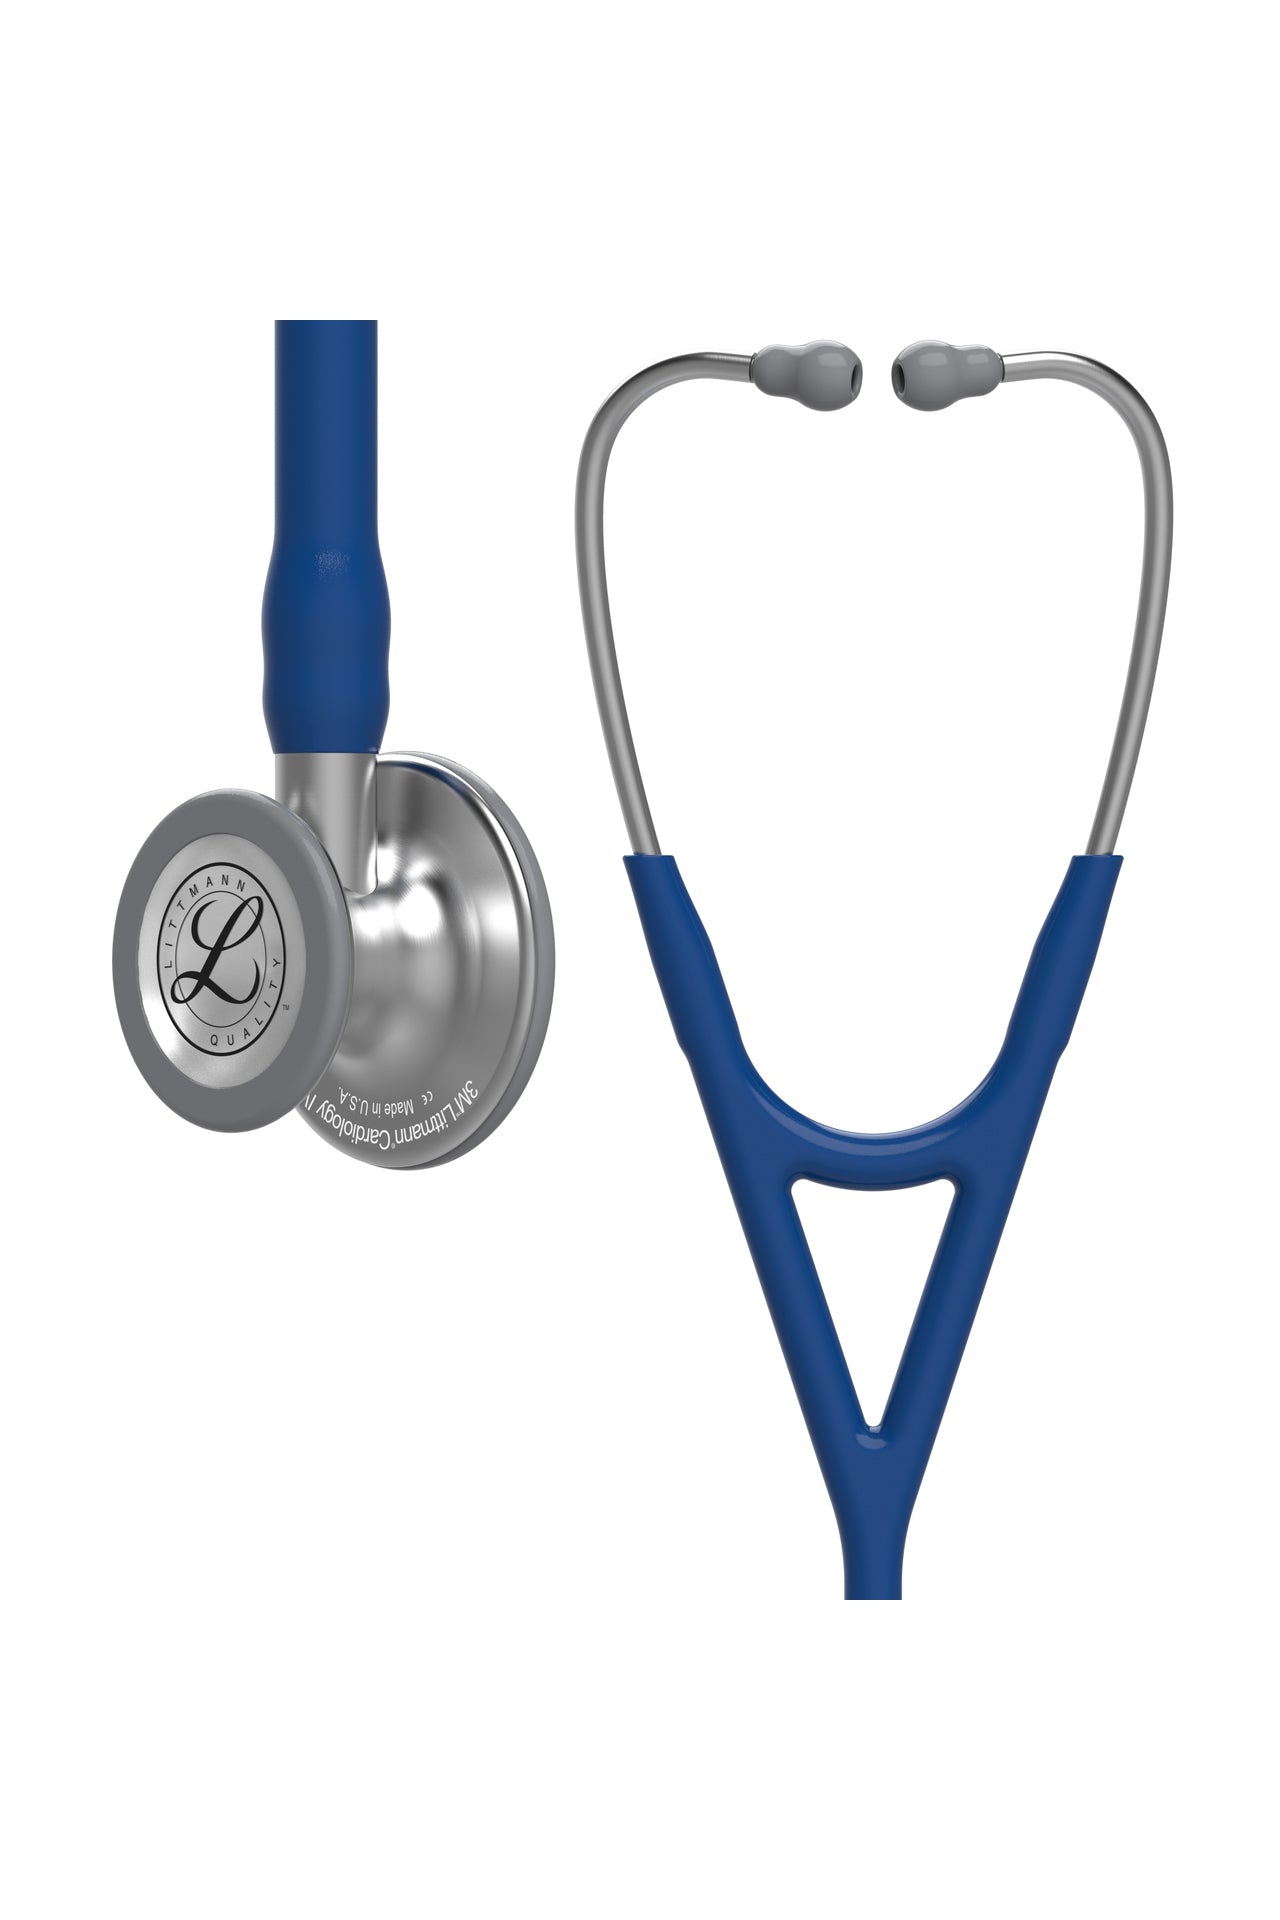 3M™ Littmann® Cardiology IV™ Diagnostic Stethoscope, Standard-Finish Chestpiece, Navy Blue Tube, Stem and Headset, 27 inch, 6154